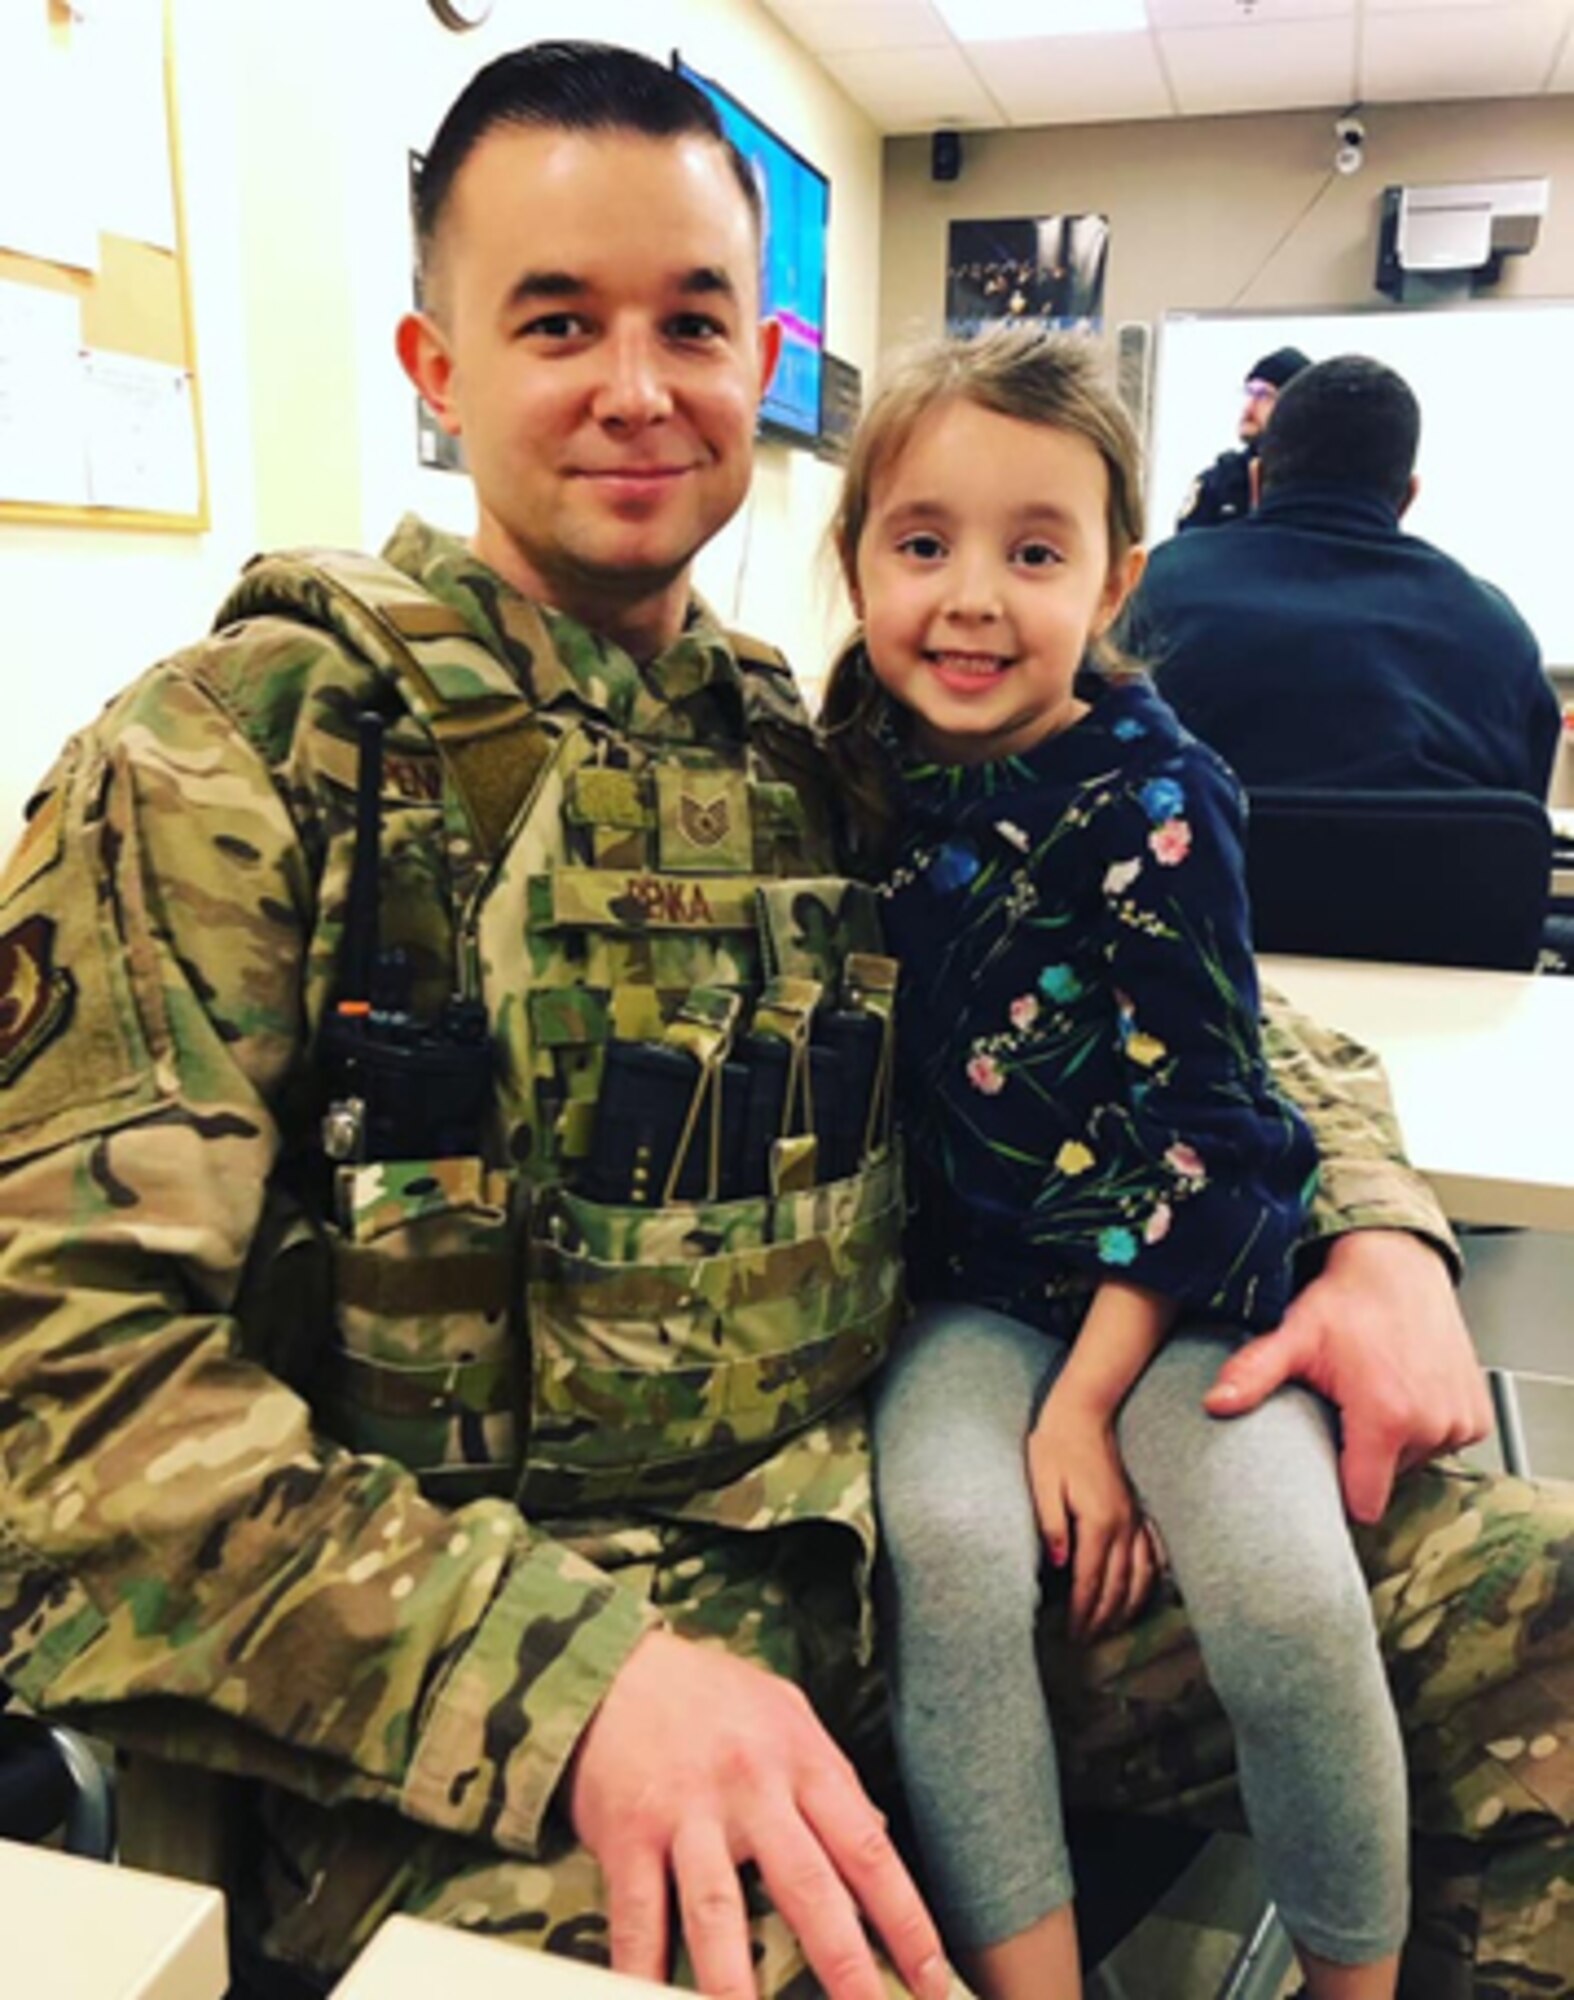 Congratulations to Tech. Sgt. Brian Penka, this week’s 412th Test Wing’s Warrior Spotlight. Penka’s first duty station was Malmstrom Air Force Base, Montana. He was then assigned to Joint Base Andrews, Maryland. He has been deployed Kosovo in 2010. Penka’s five-year goals include: being promoted to master sergeant, testing for senior master sergeant; working towards a Master’s Degree, have a few more children, and living on the East Coast. (Photo courtesy of Tech. Sgt. Brian Penka)